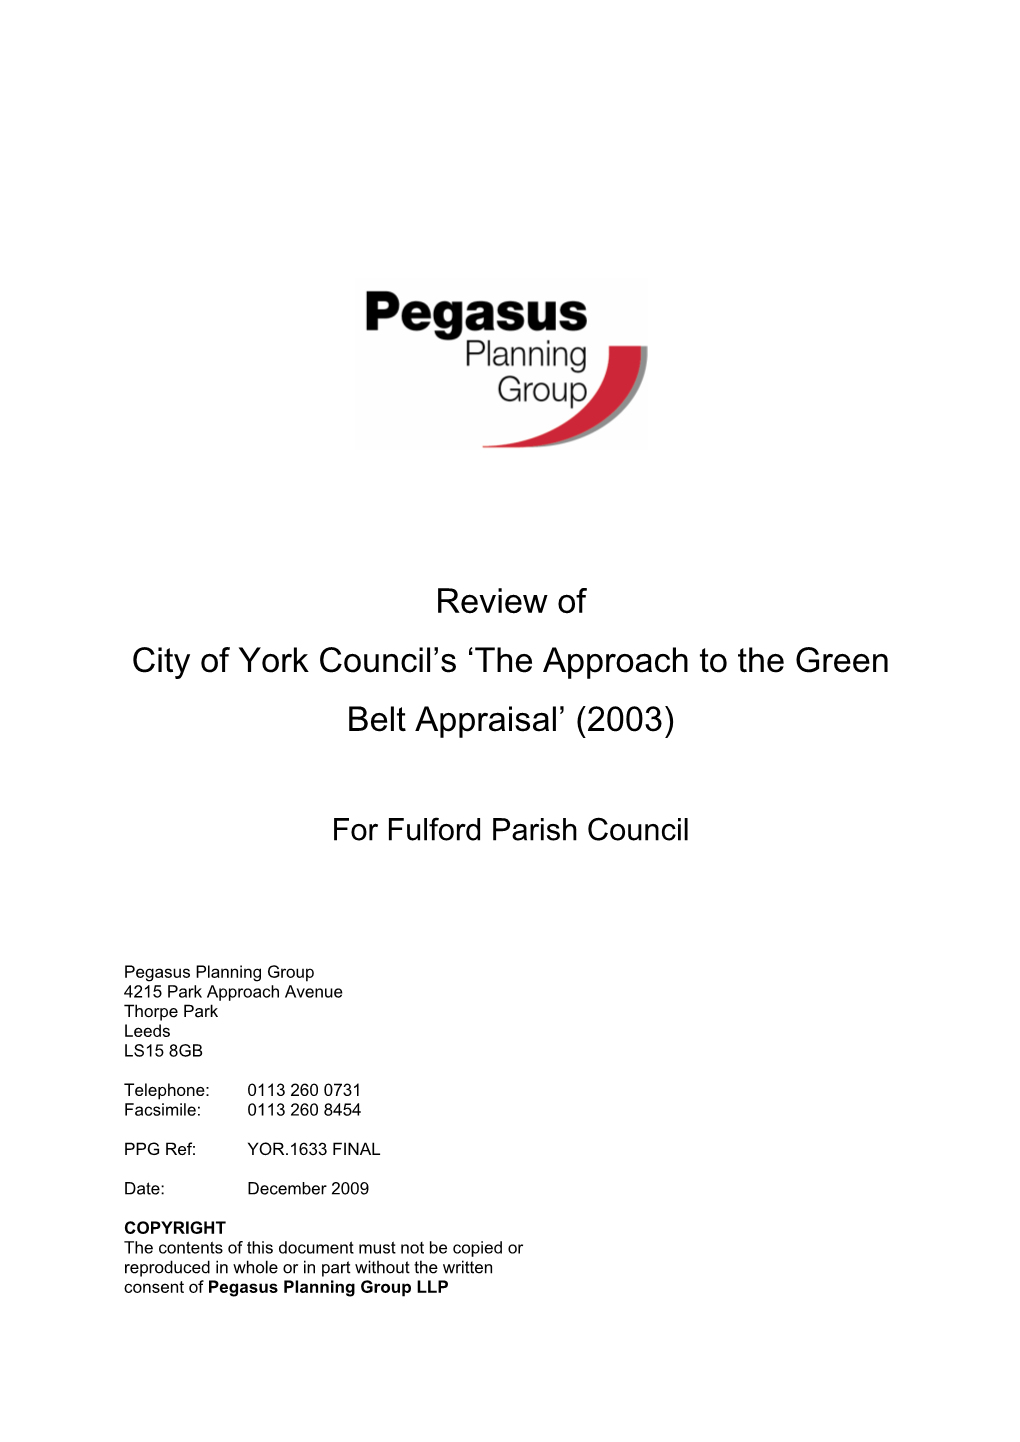 Review of City of York Council's 'The Approach to the Green Belt Appraisal'